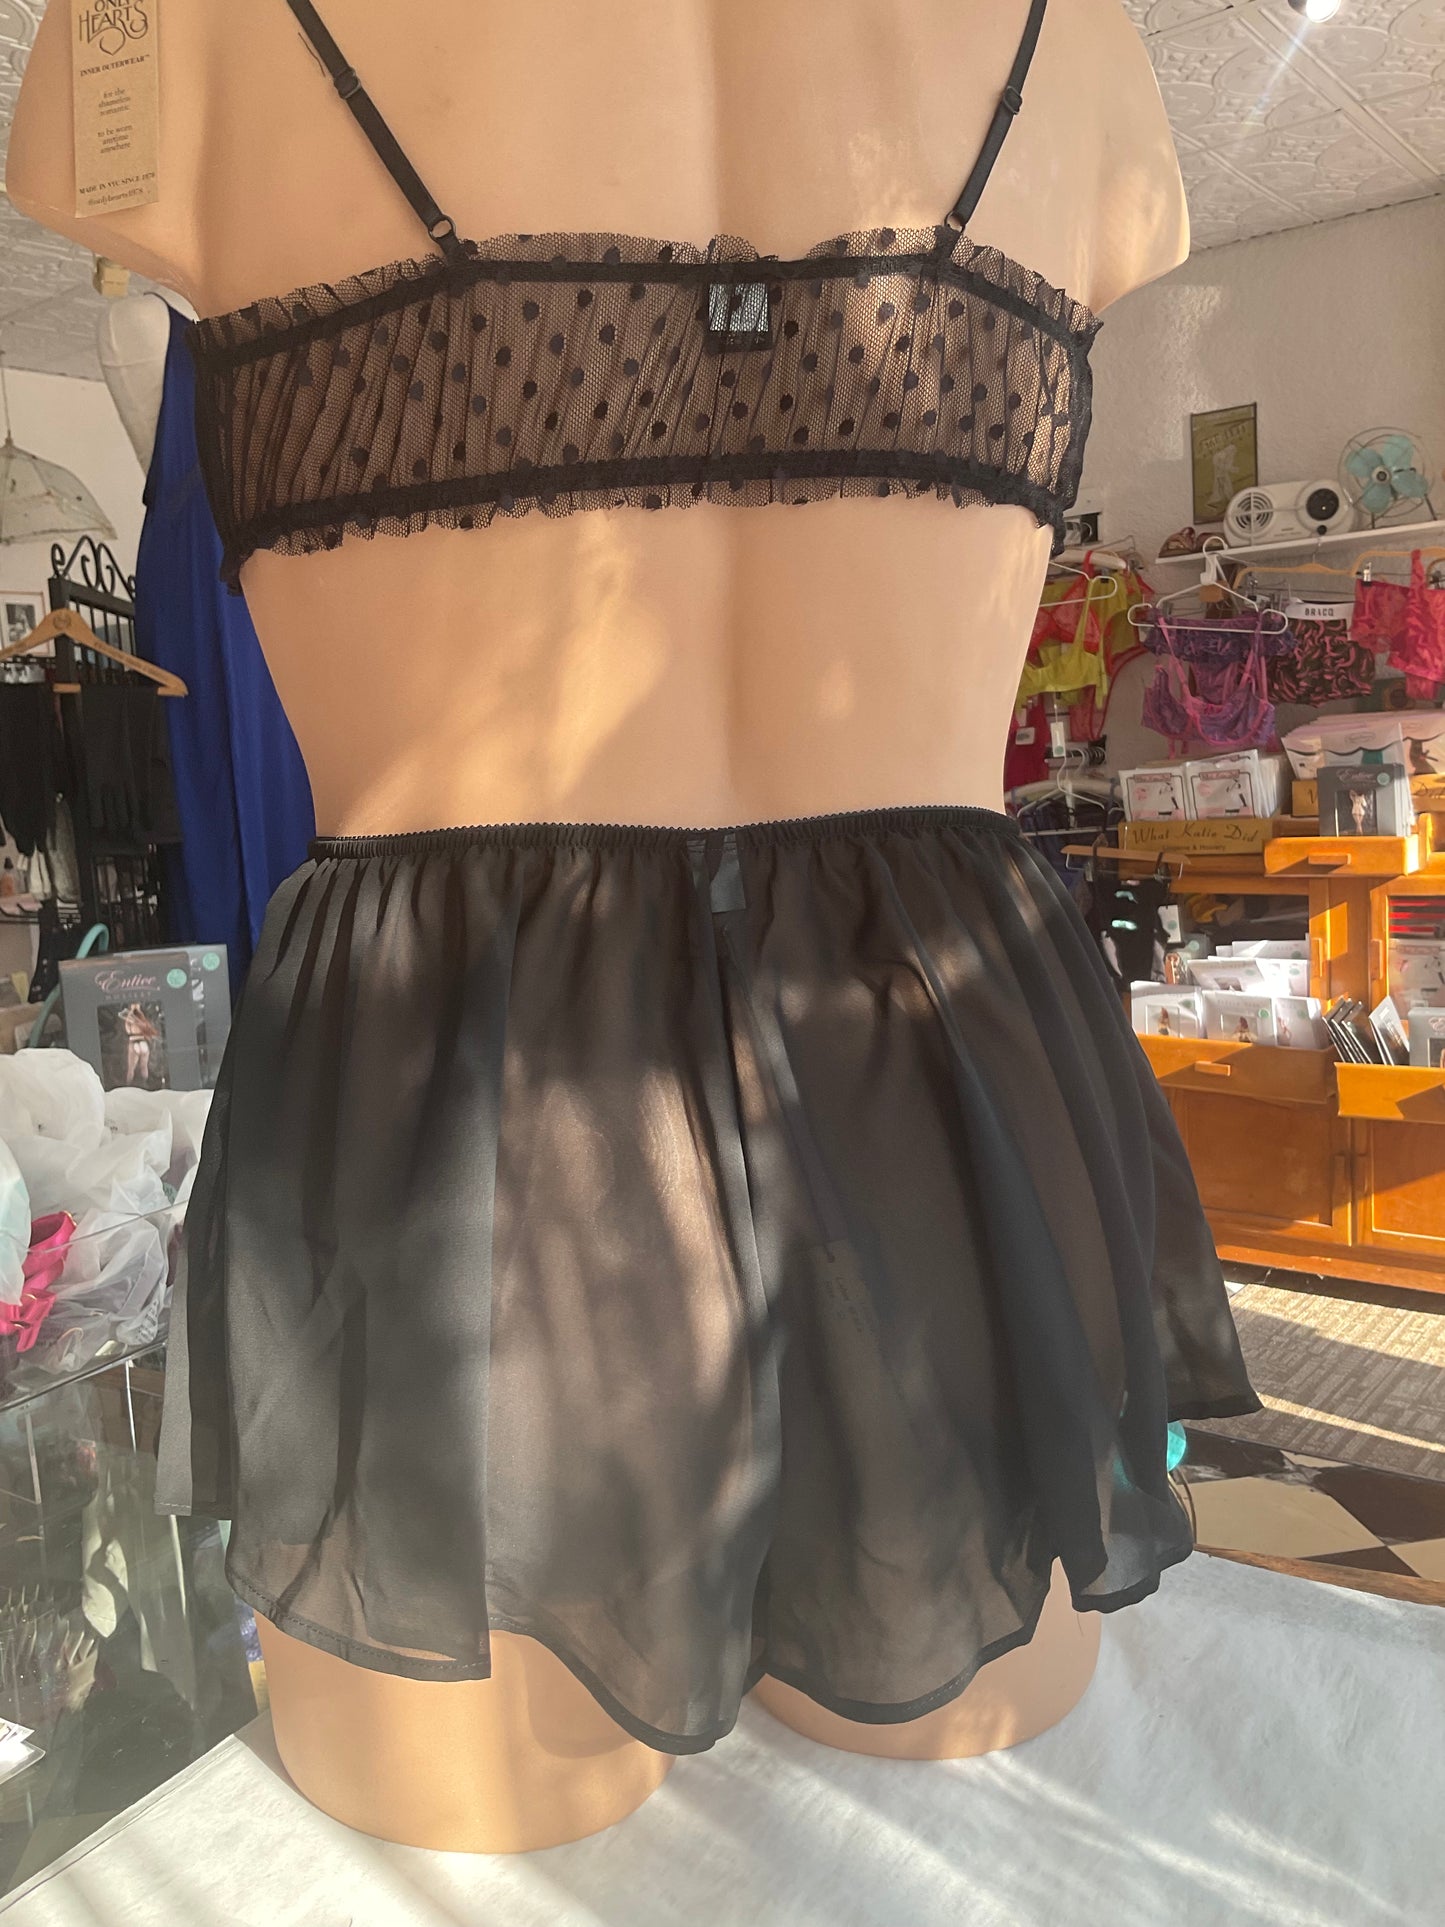 Coucou Lola Chiffon Tap Short By Only Hearts in Black - S - XL+